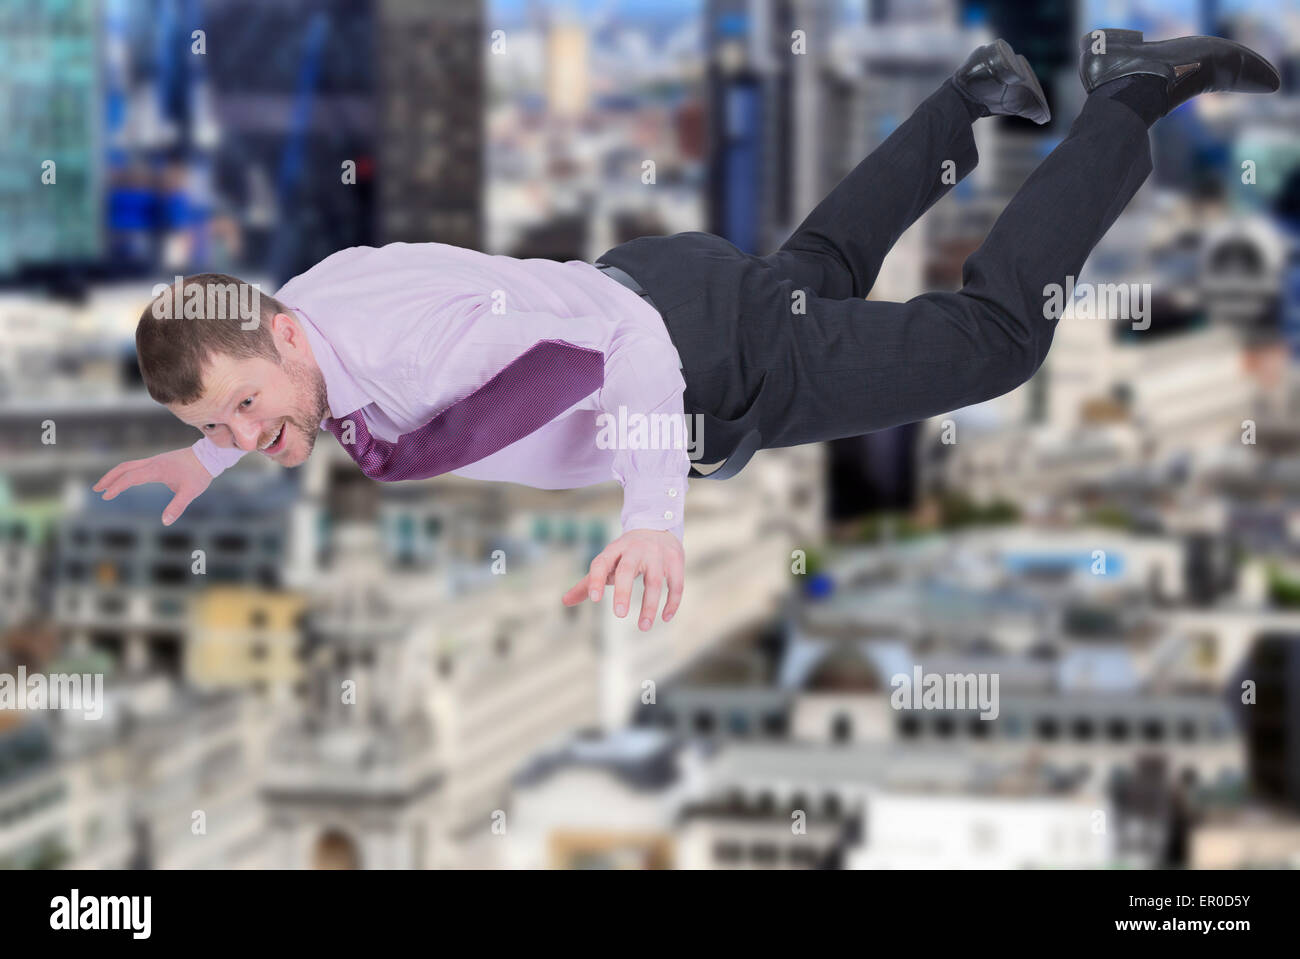 Businessman falling down and modern city in background Stock Photo